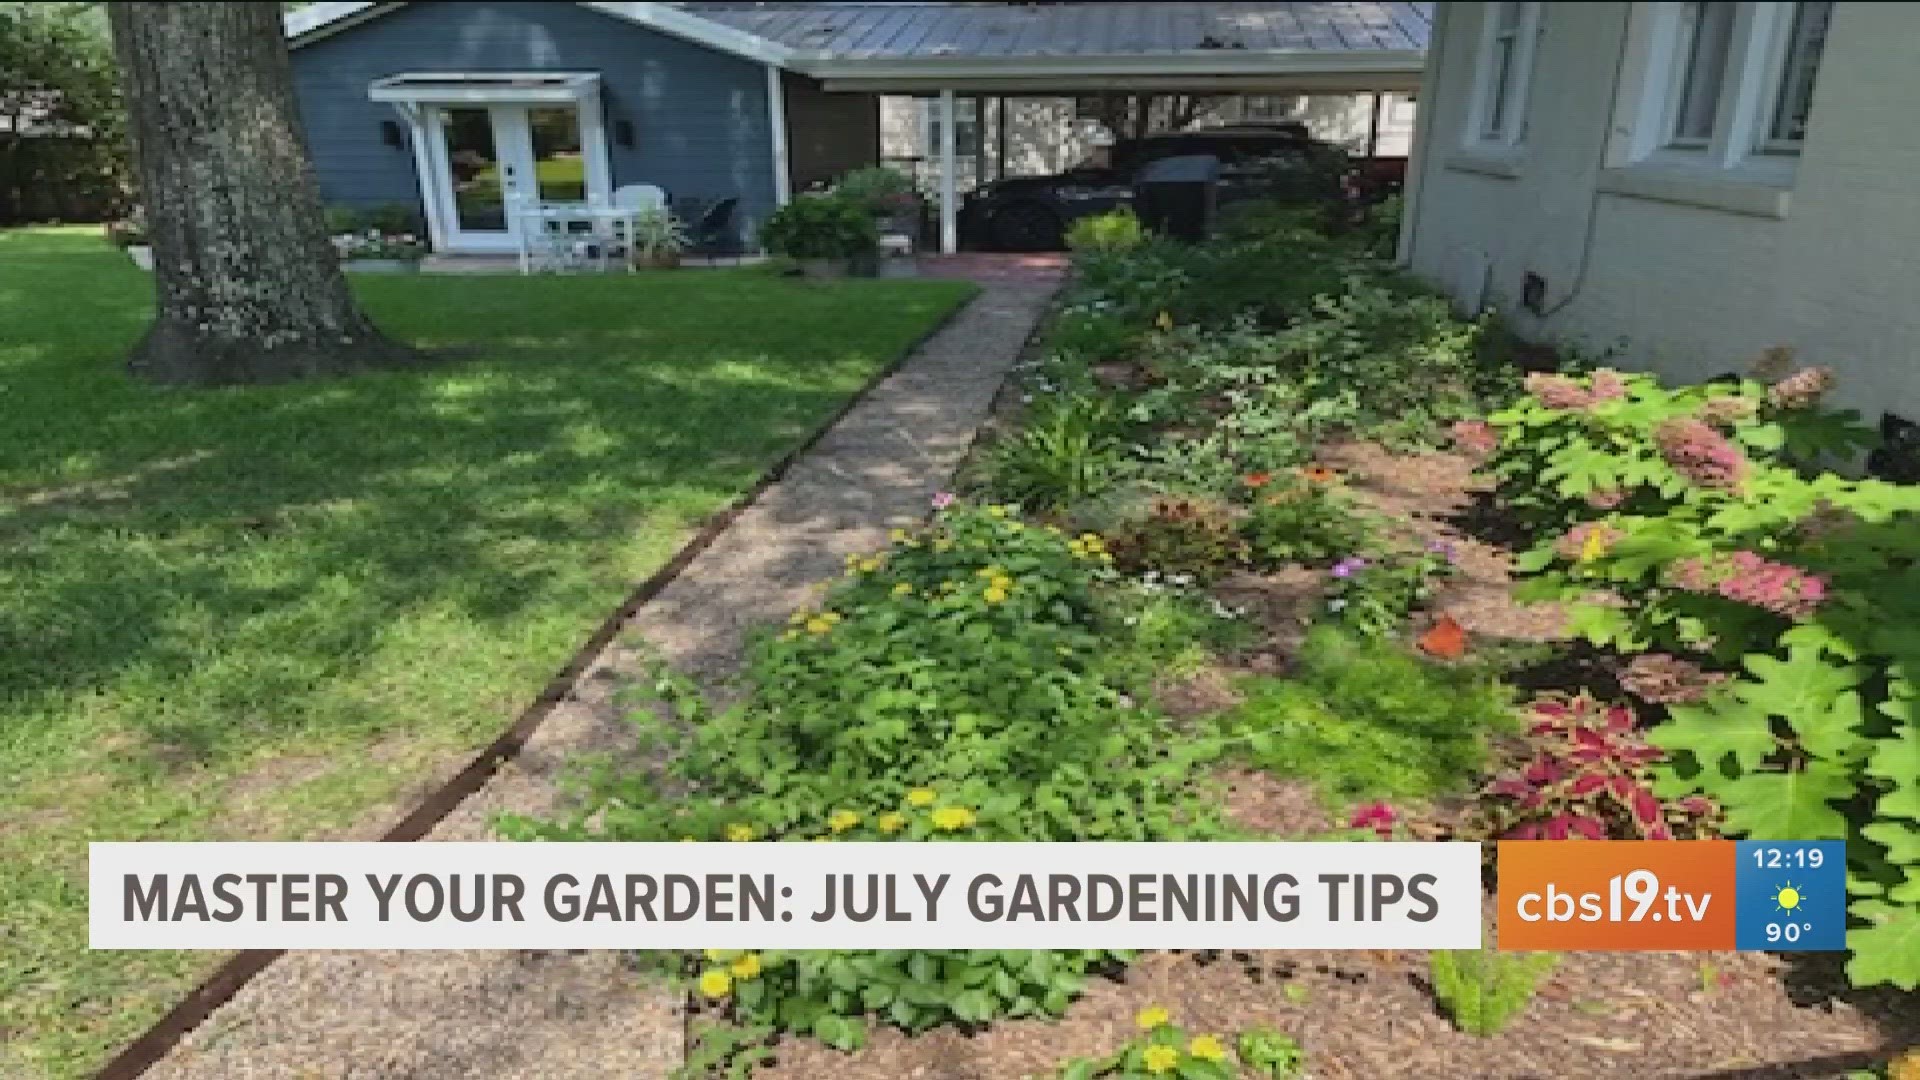 Don't forget to enter CBS19 and J&J Exterminating's Yard of the Month Contest!